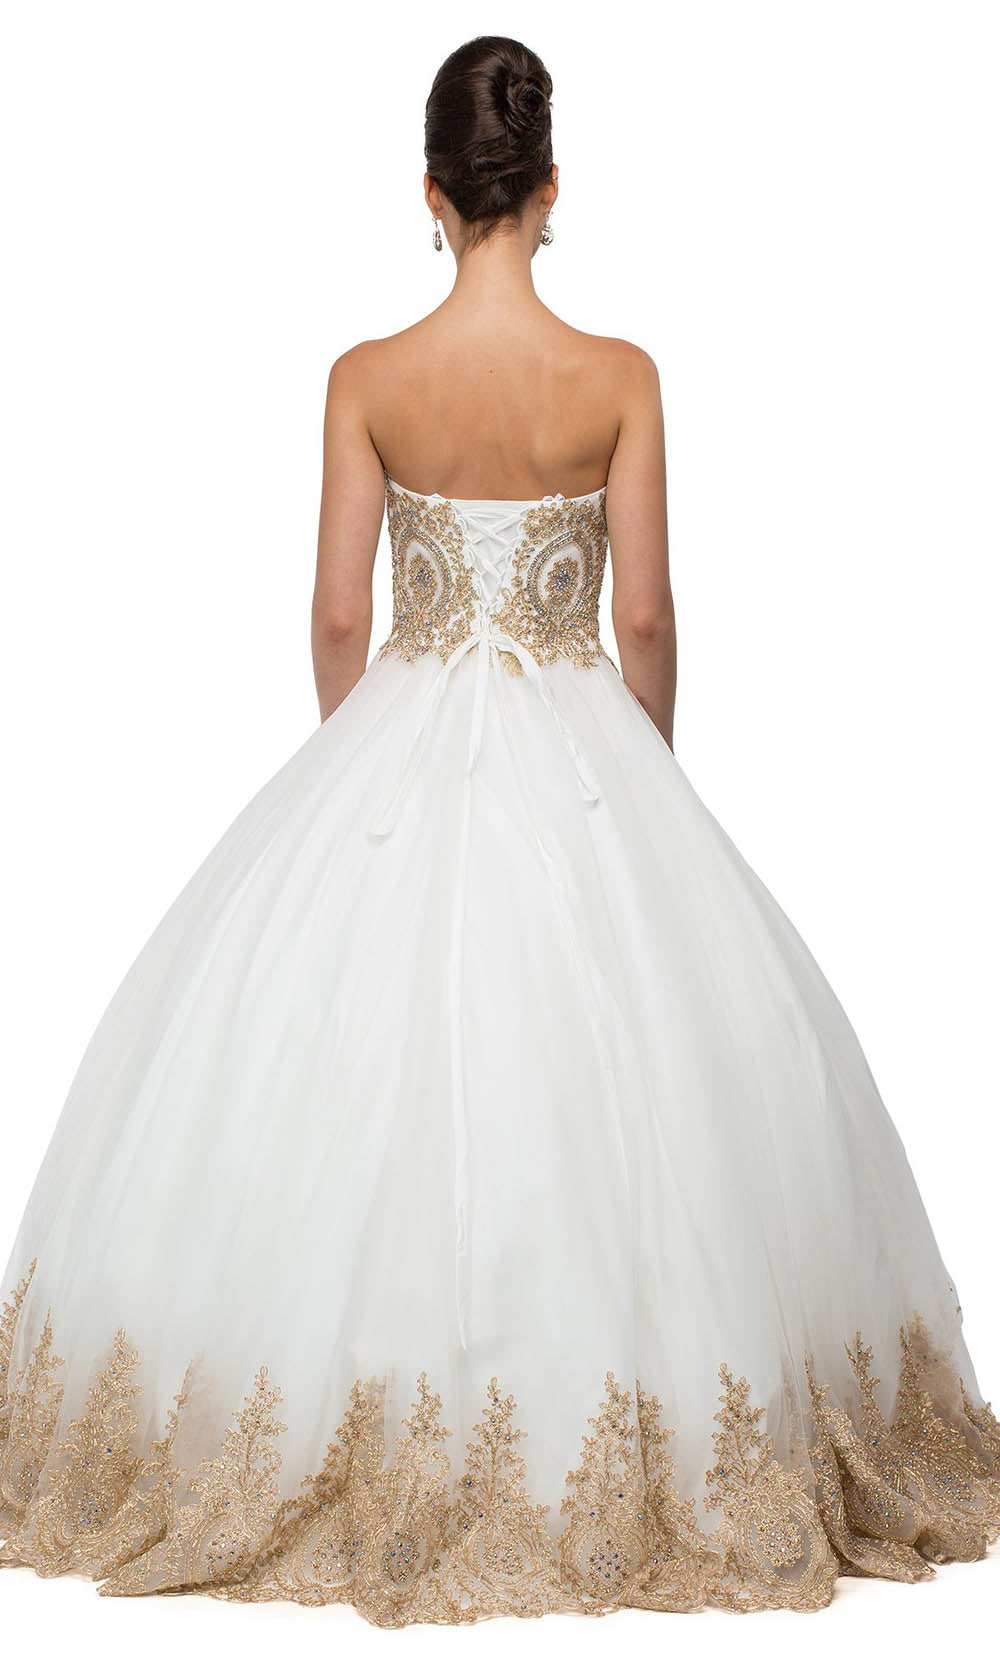 Dancing Queen - 1115 Strapless Sweetheart Embroidered Lace Ballgown In White & Ivory